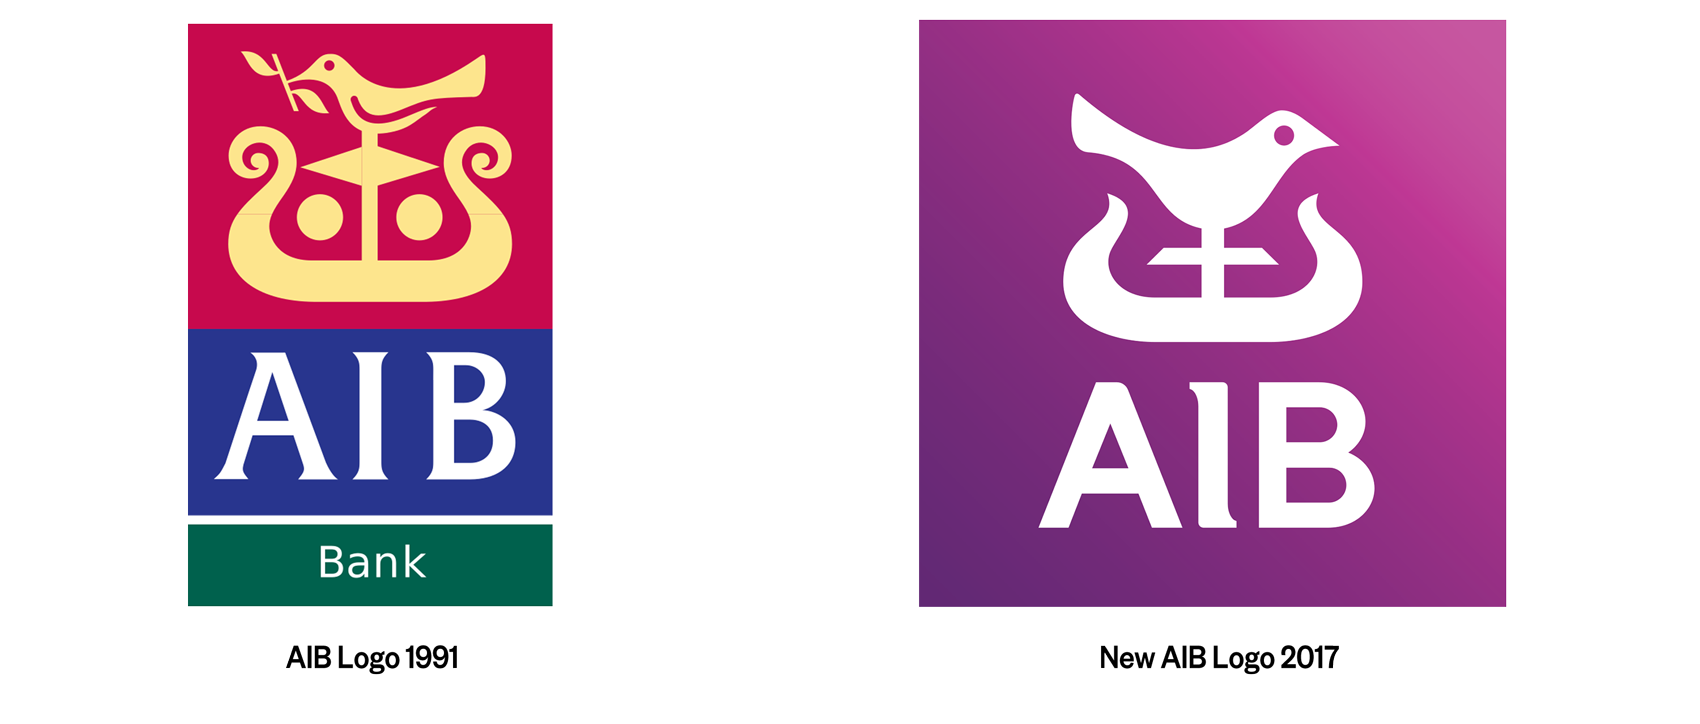 Original AIB logo from 1991 compared to new logo redesign in 2017